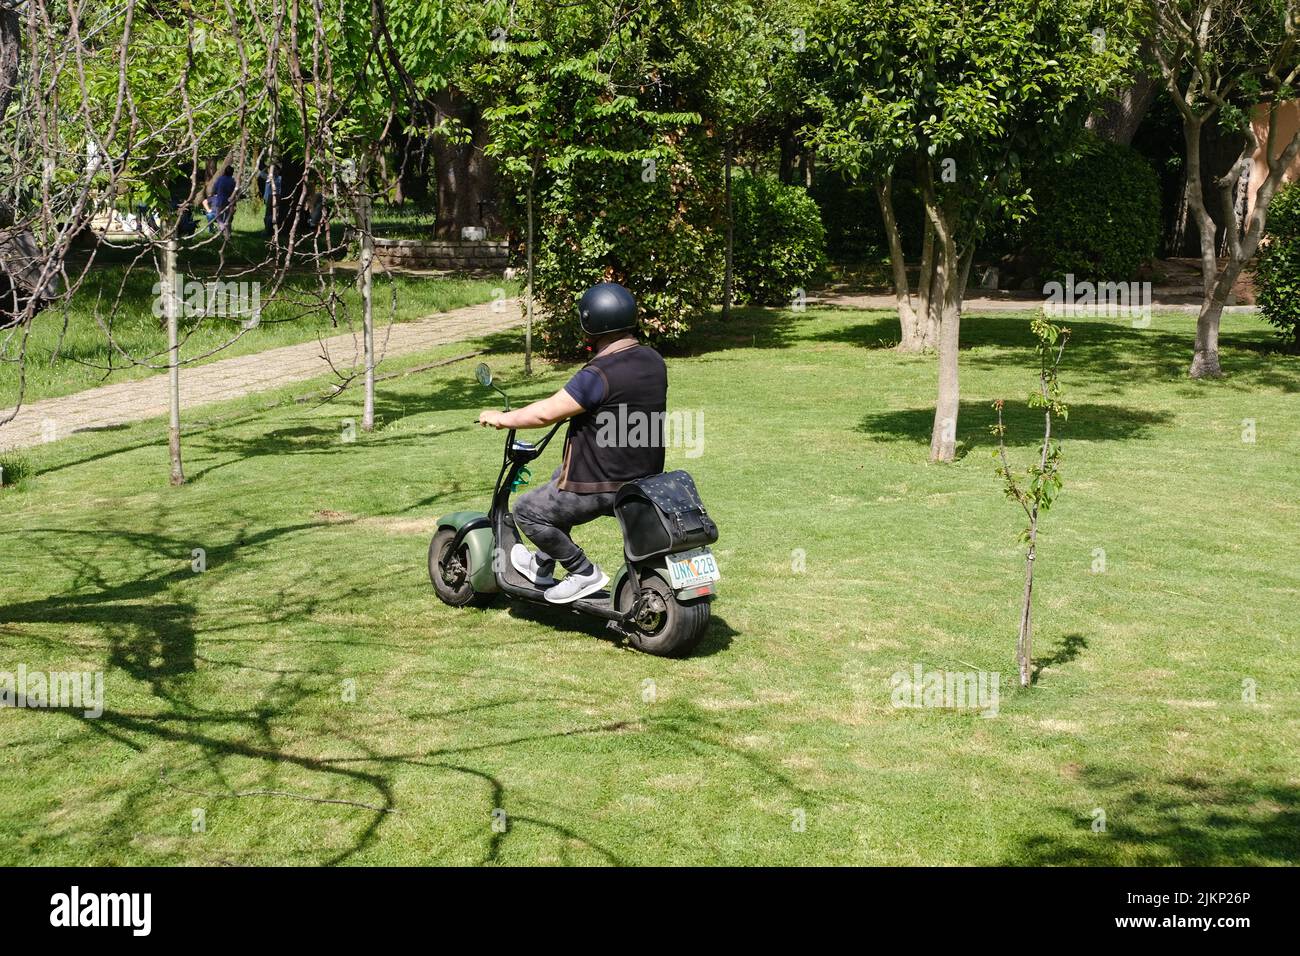 A young man driving a City Coco brand electric scooter on the grass in Fenerbahce Park, Istanbul Stock Photo